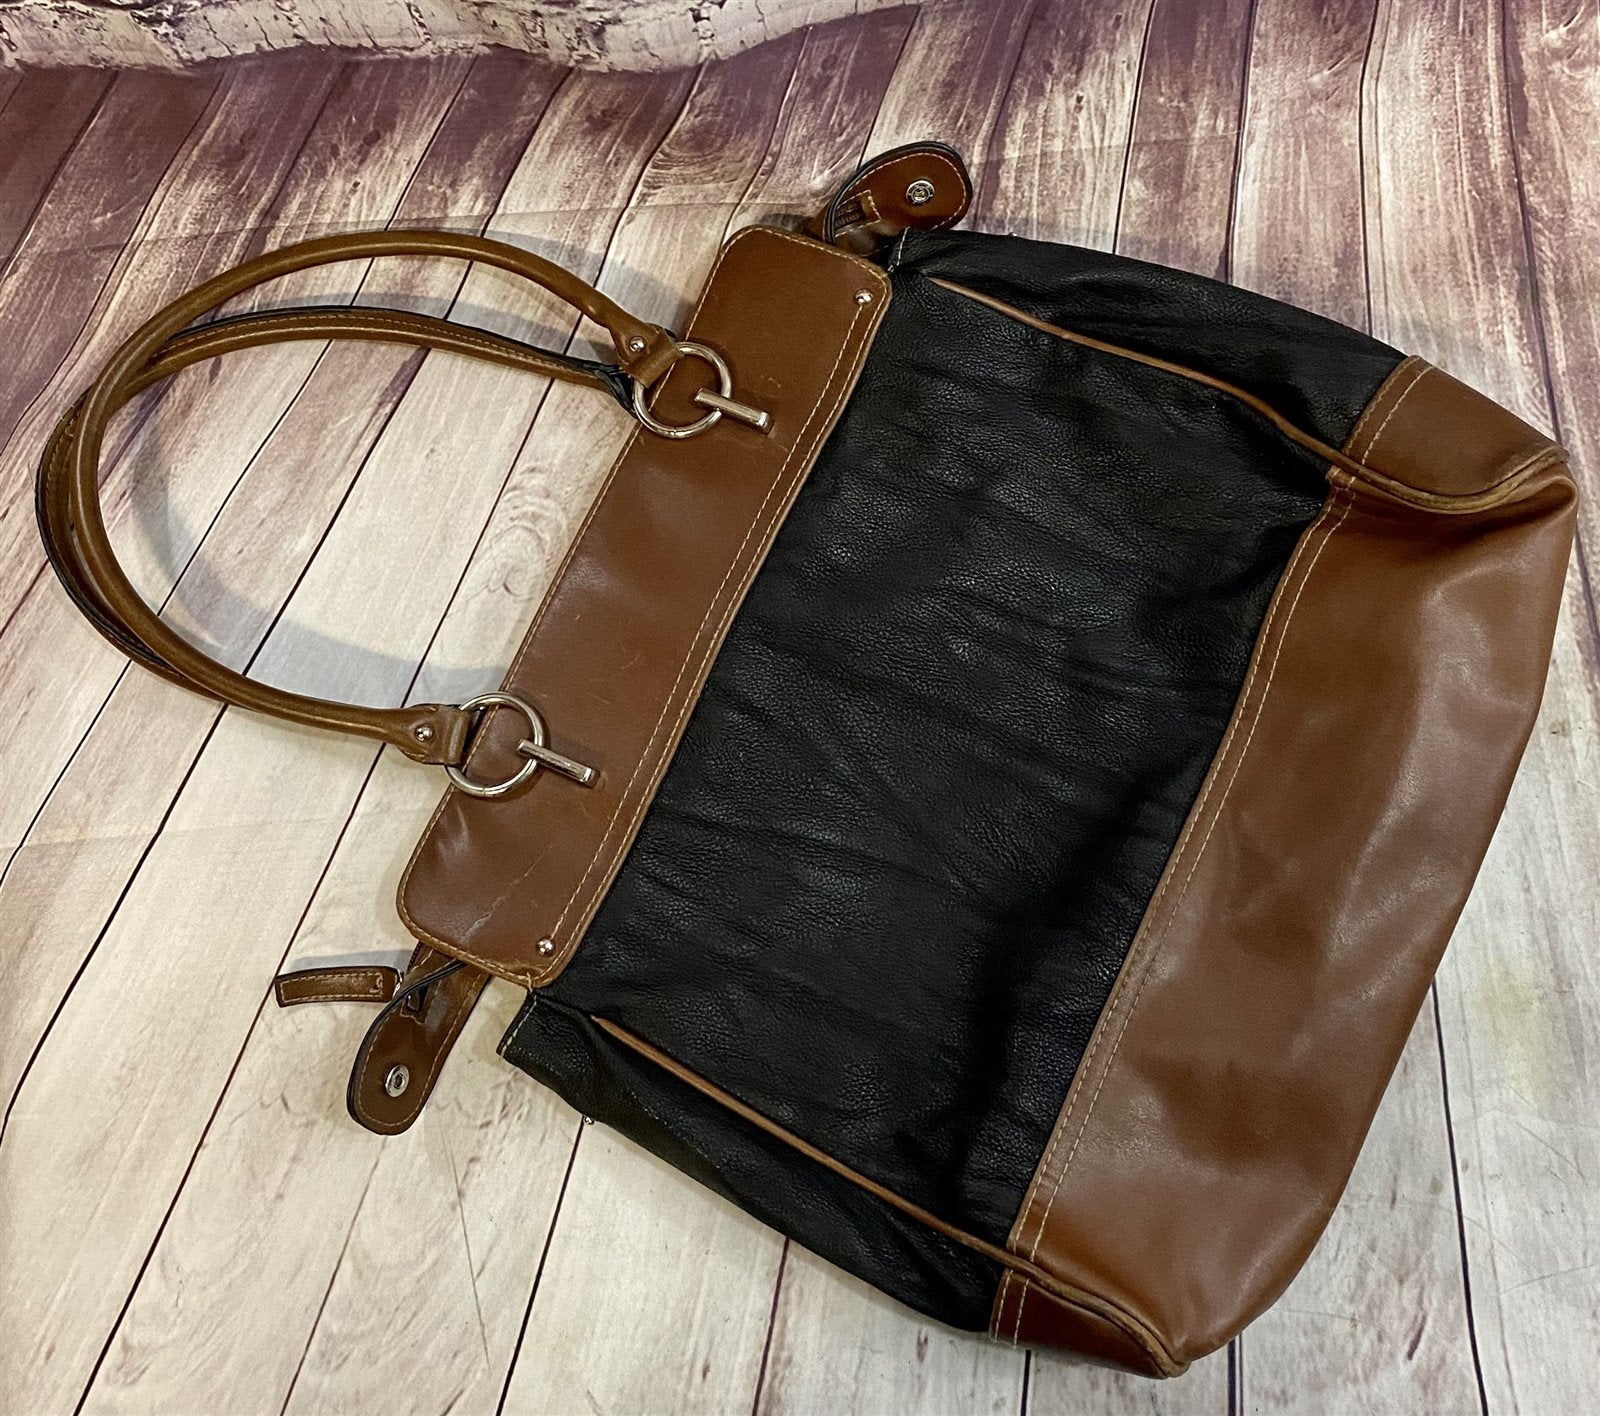 Large Vintage Chaps Brand Black and Brown Leather Tote Style Handbag Purse